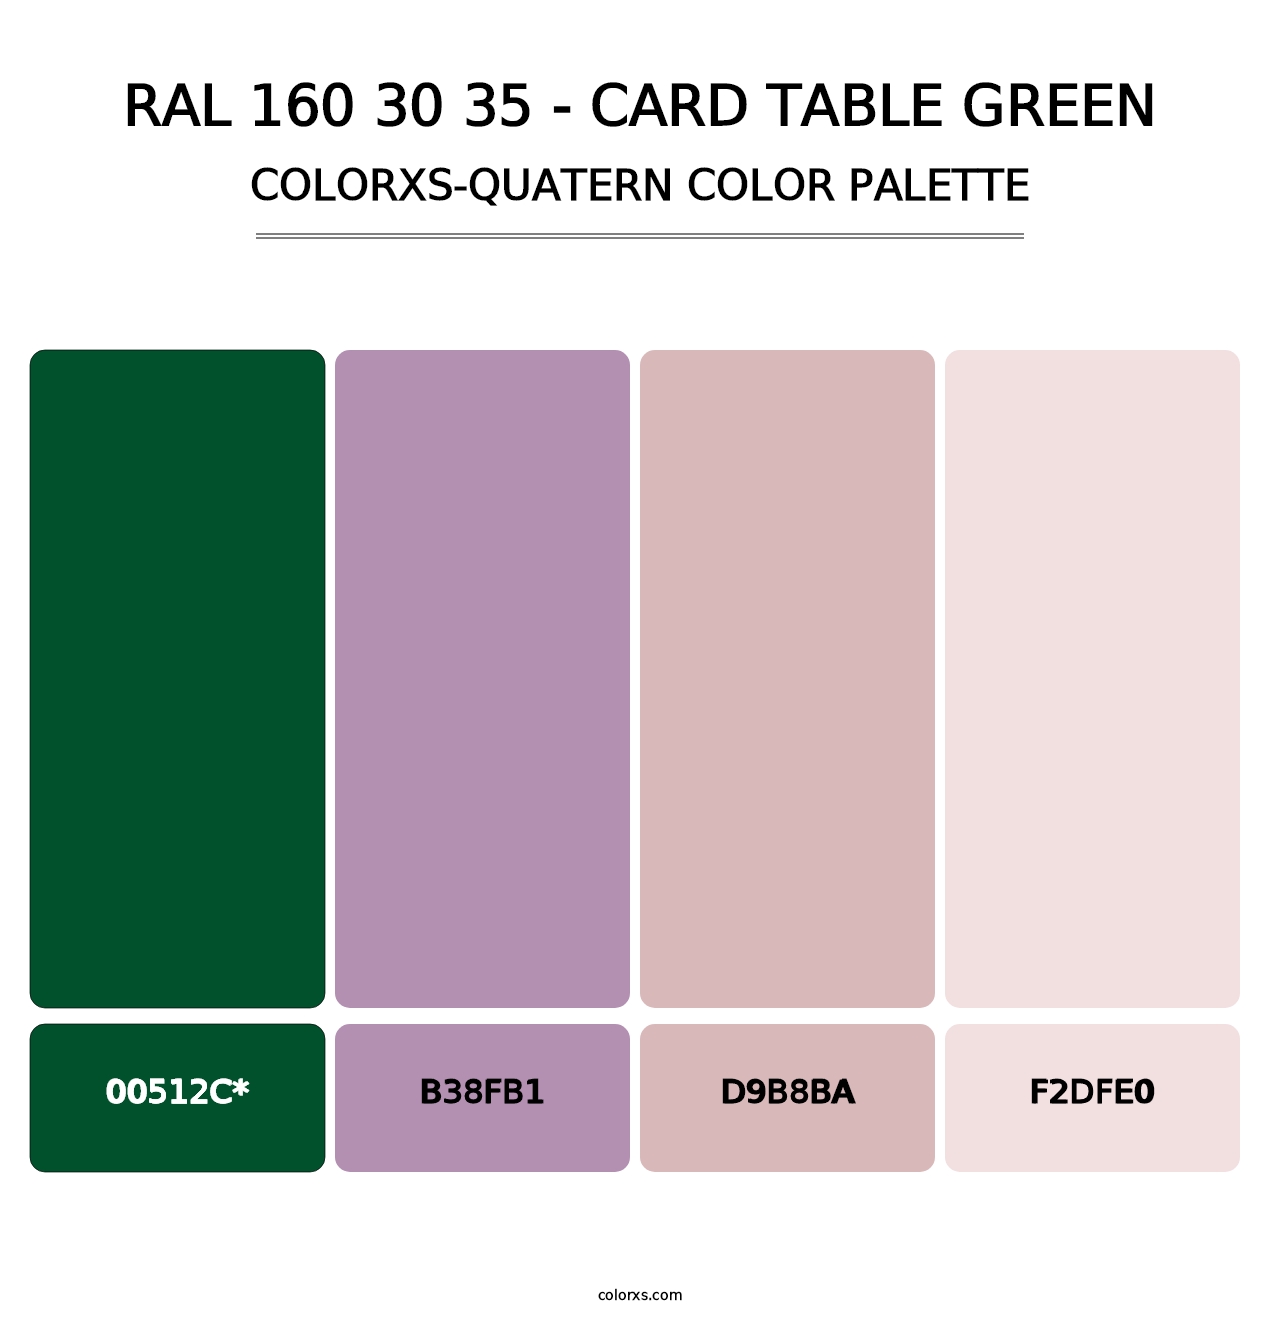 RAL 160 30 35 - Card Table Green - Colorxs Quatern Palette